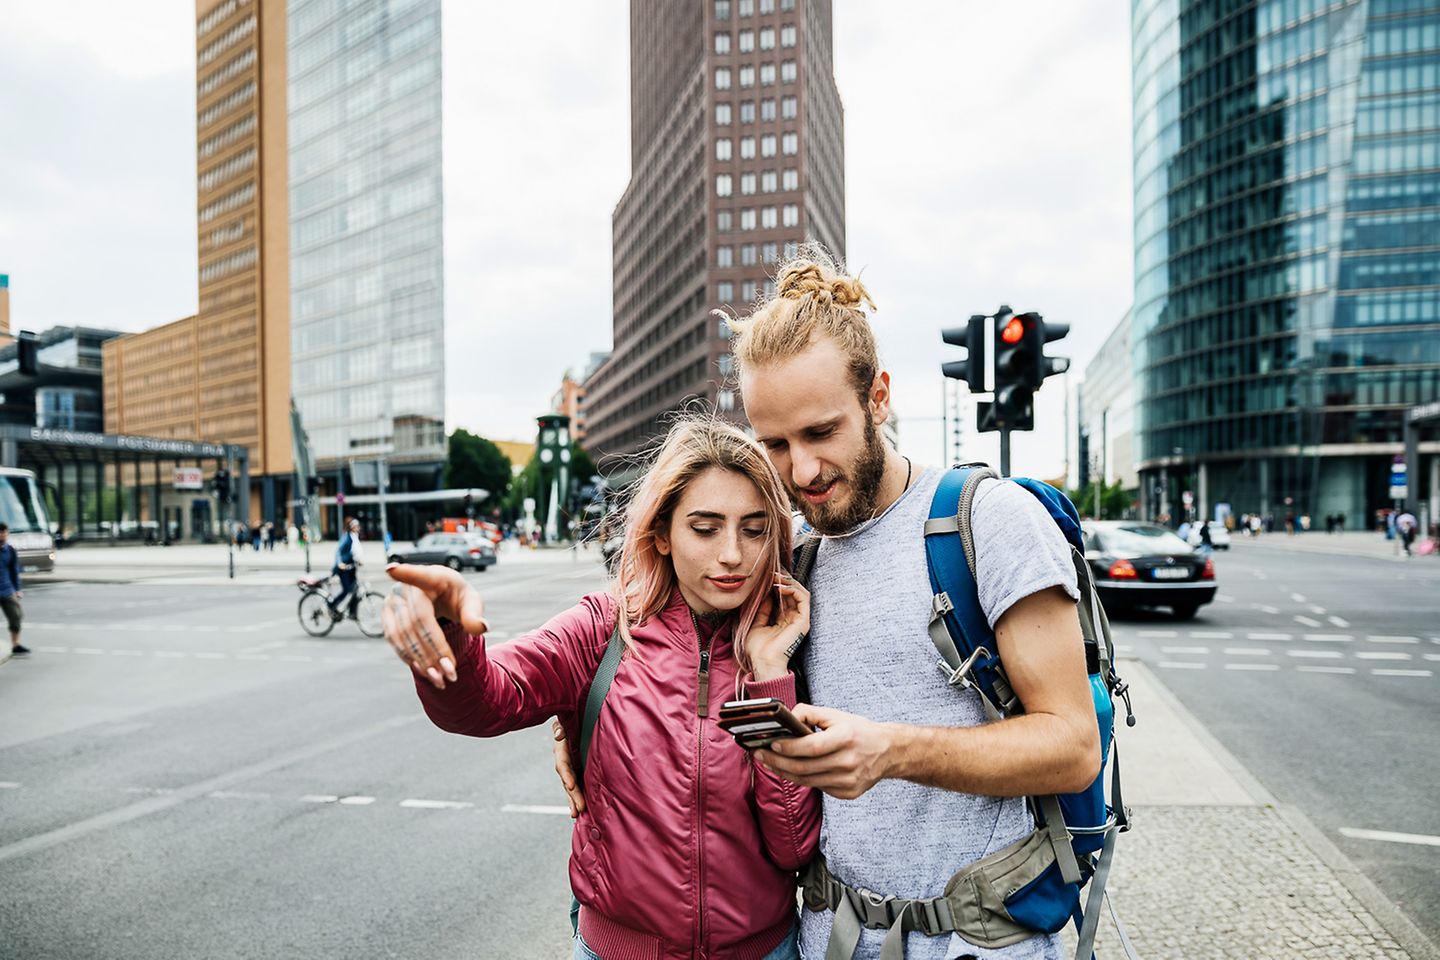 Couple standing at a crossroads looking at a smartphone. The woman points the way with her son